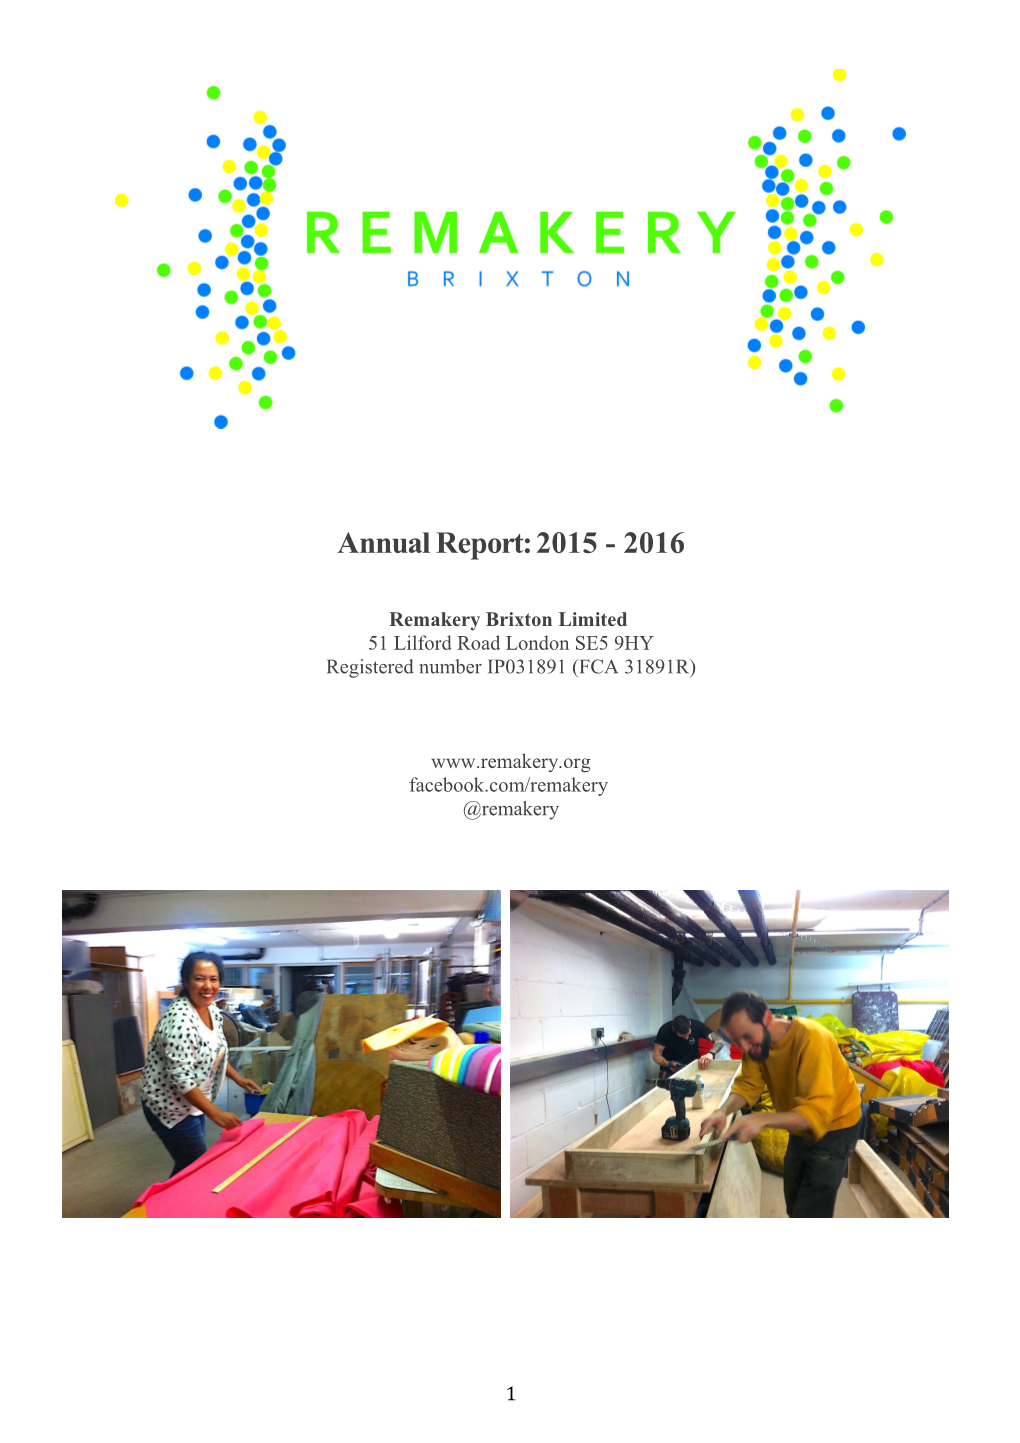 Remakery Brixton Limited